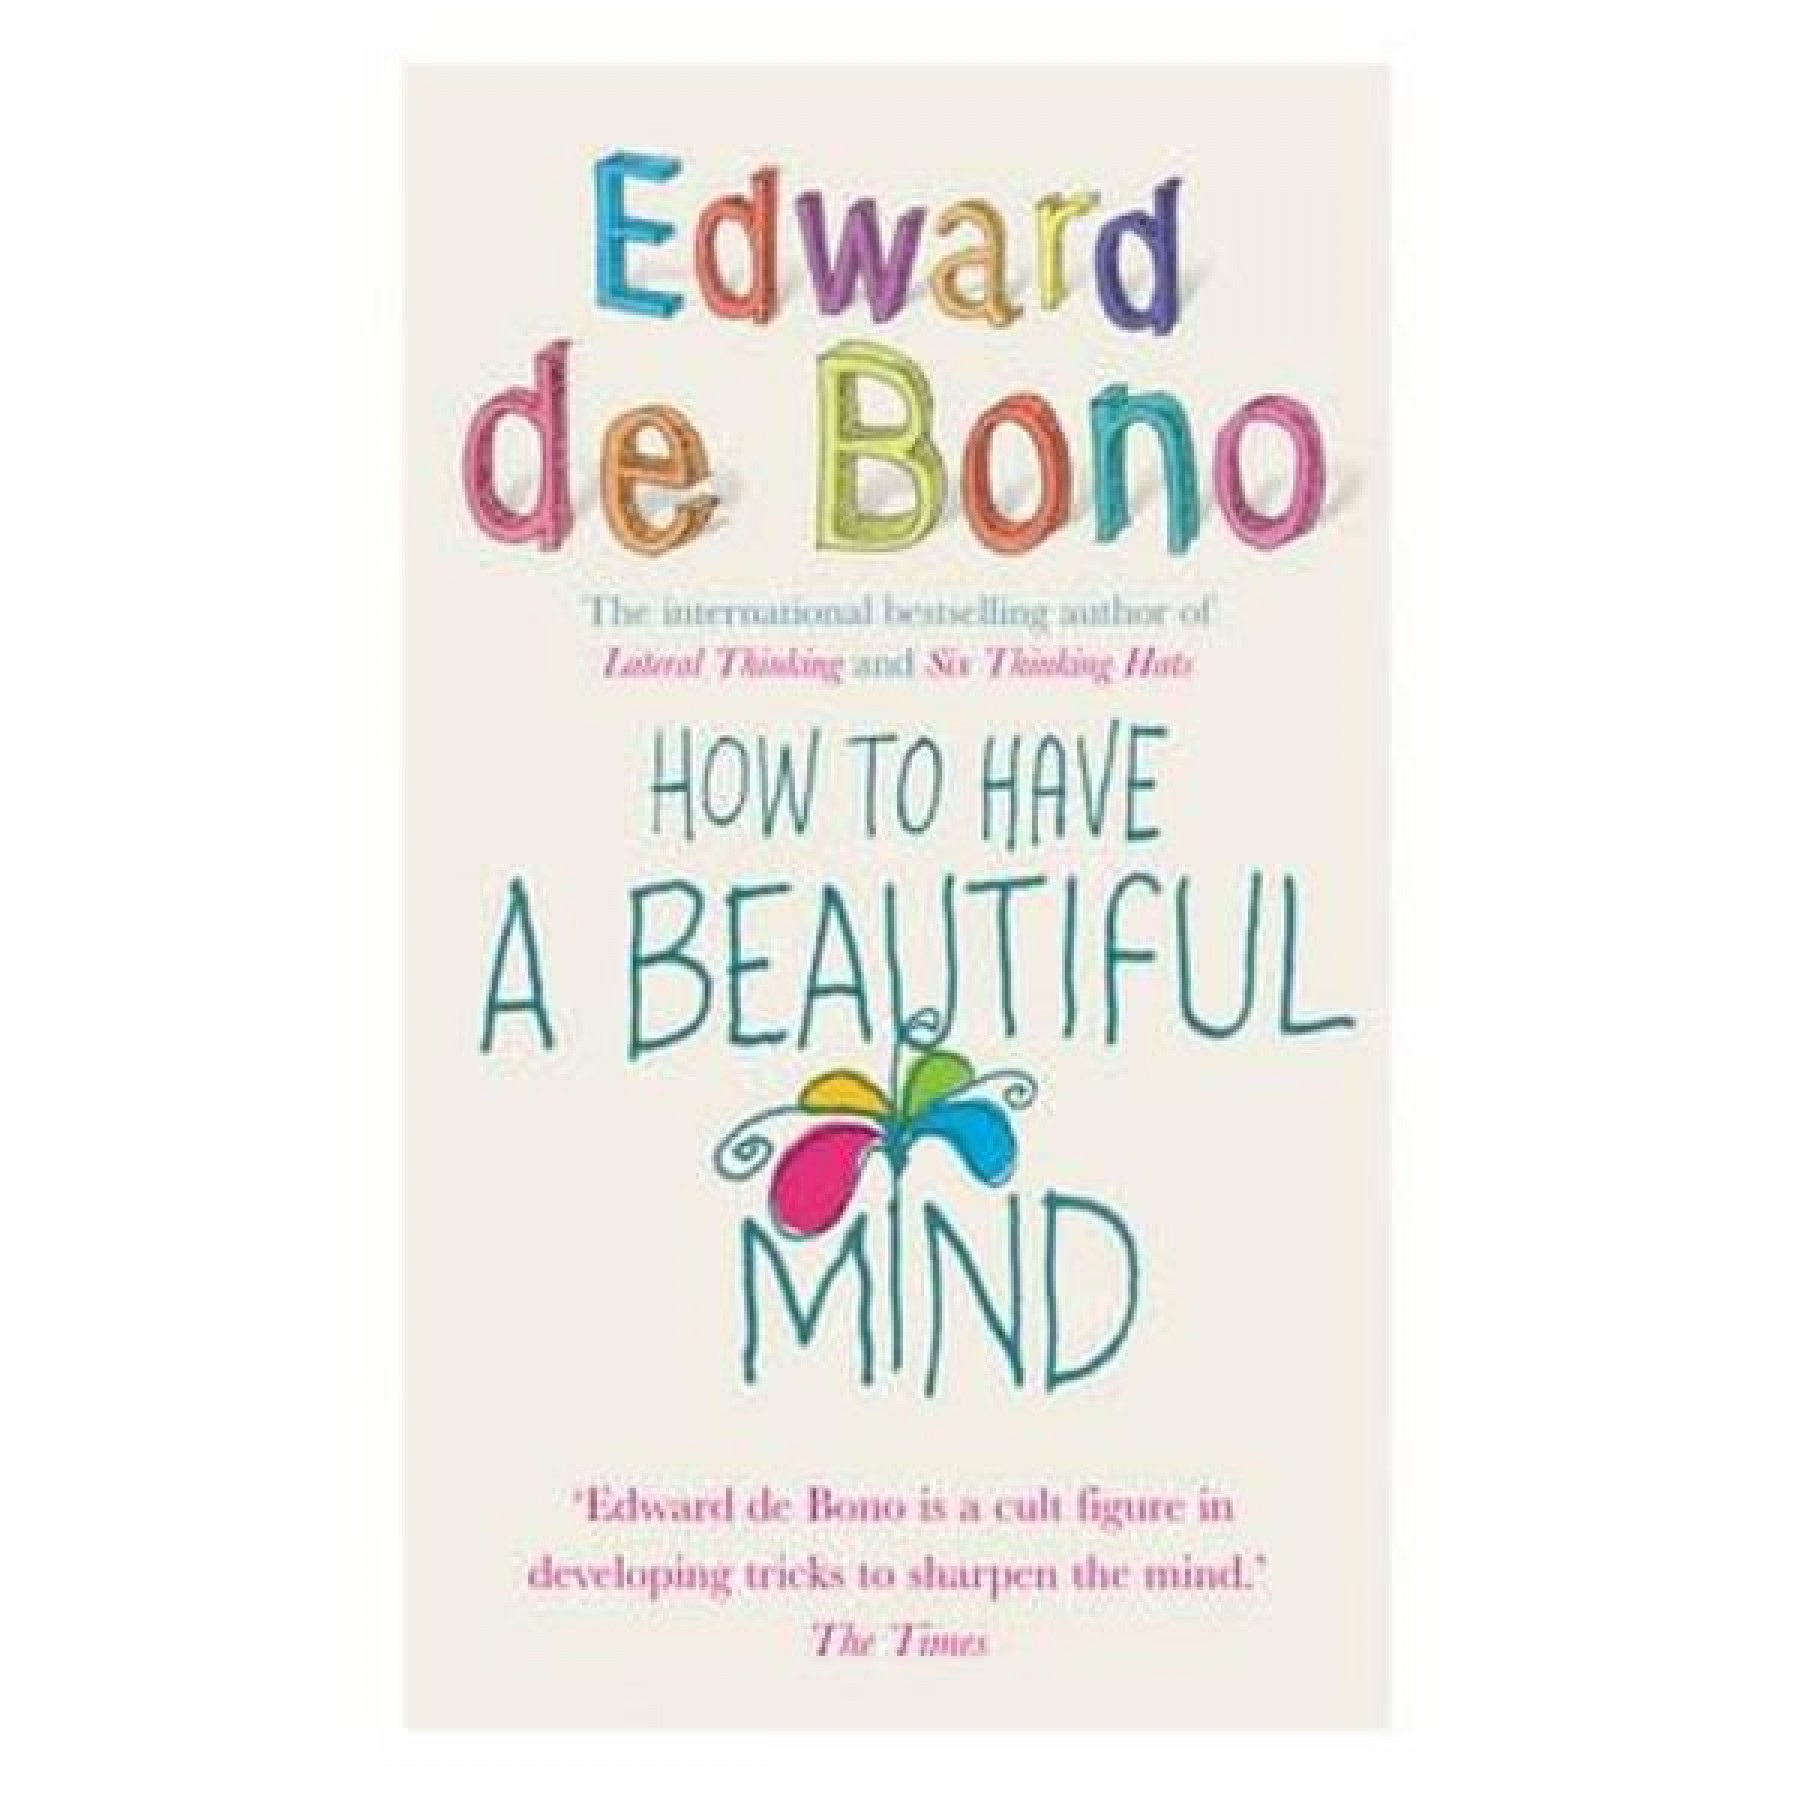 How to have a Beautiful Mind